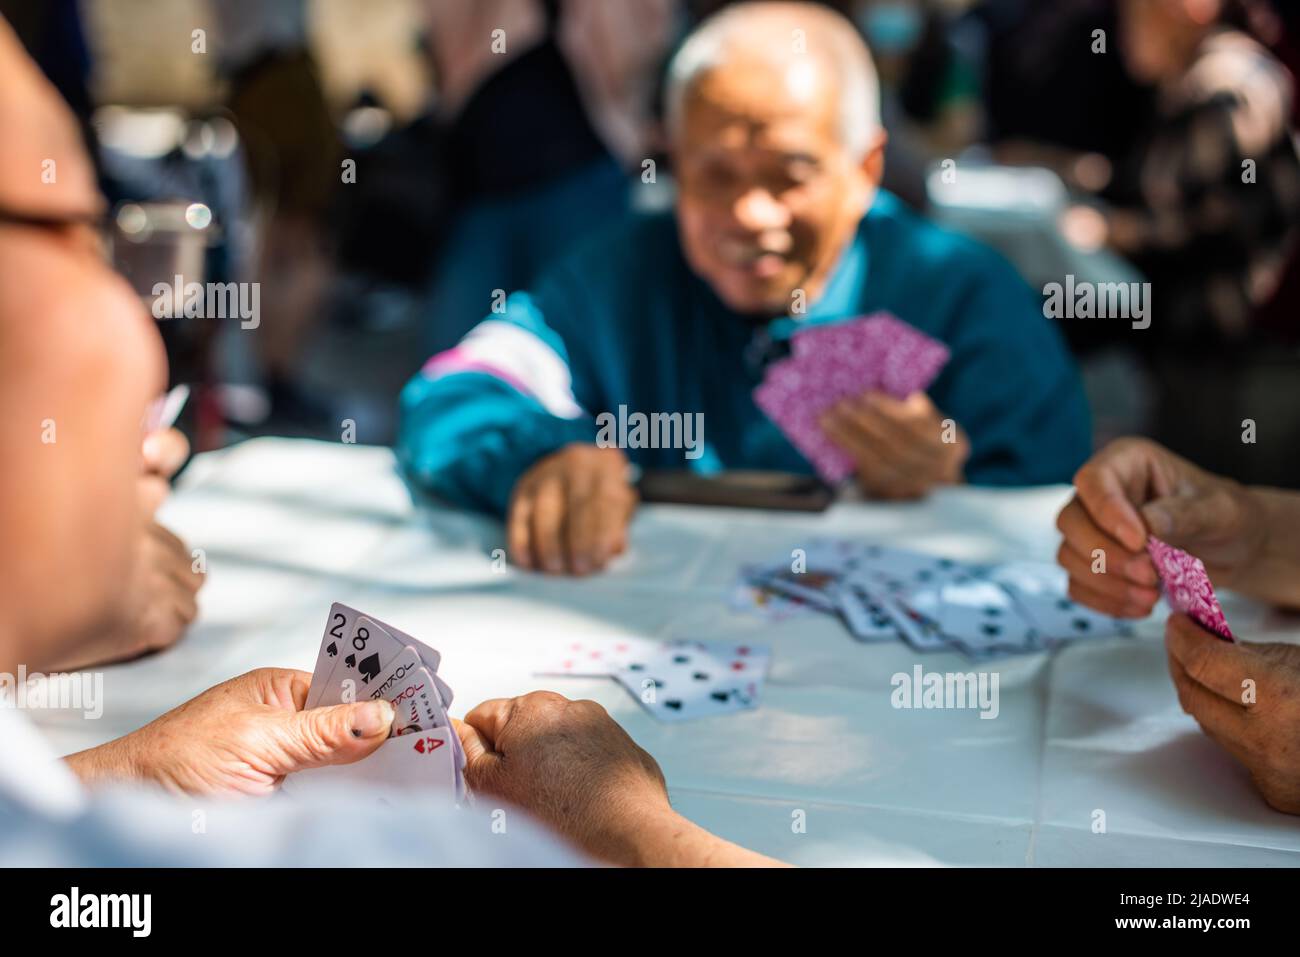 Senior Chinese people playing cards outdoors Stock Photo